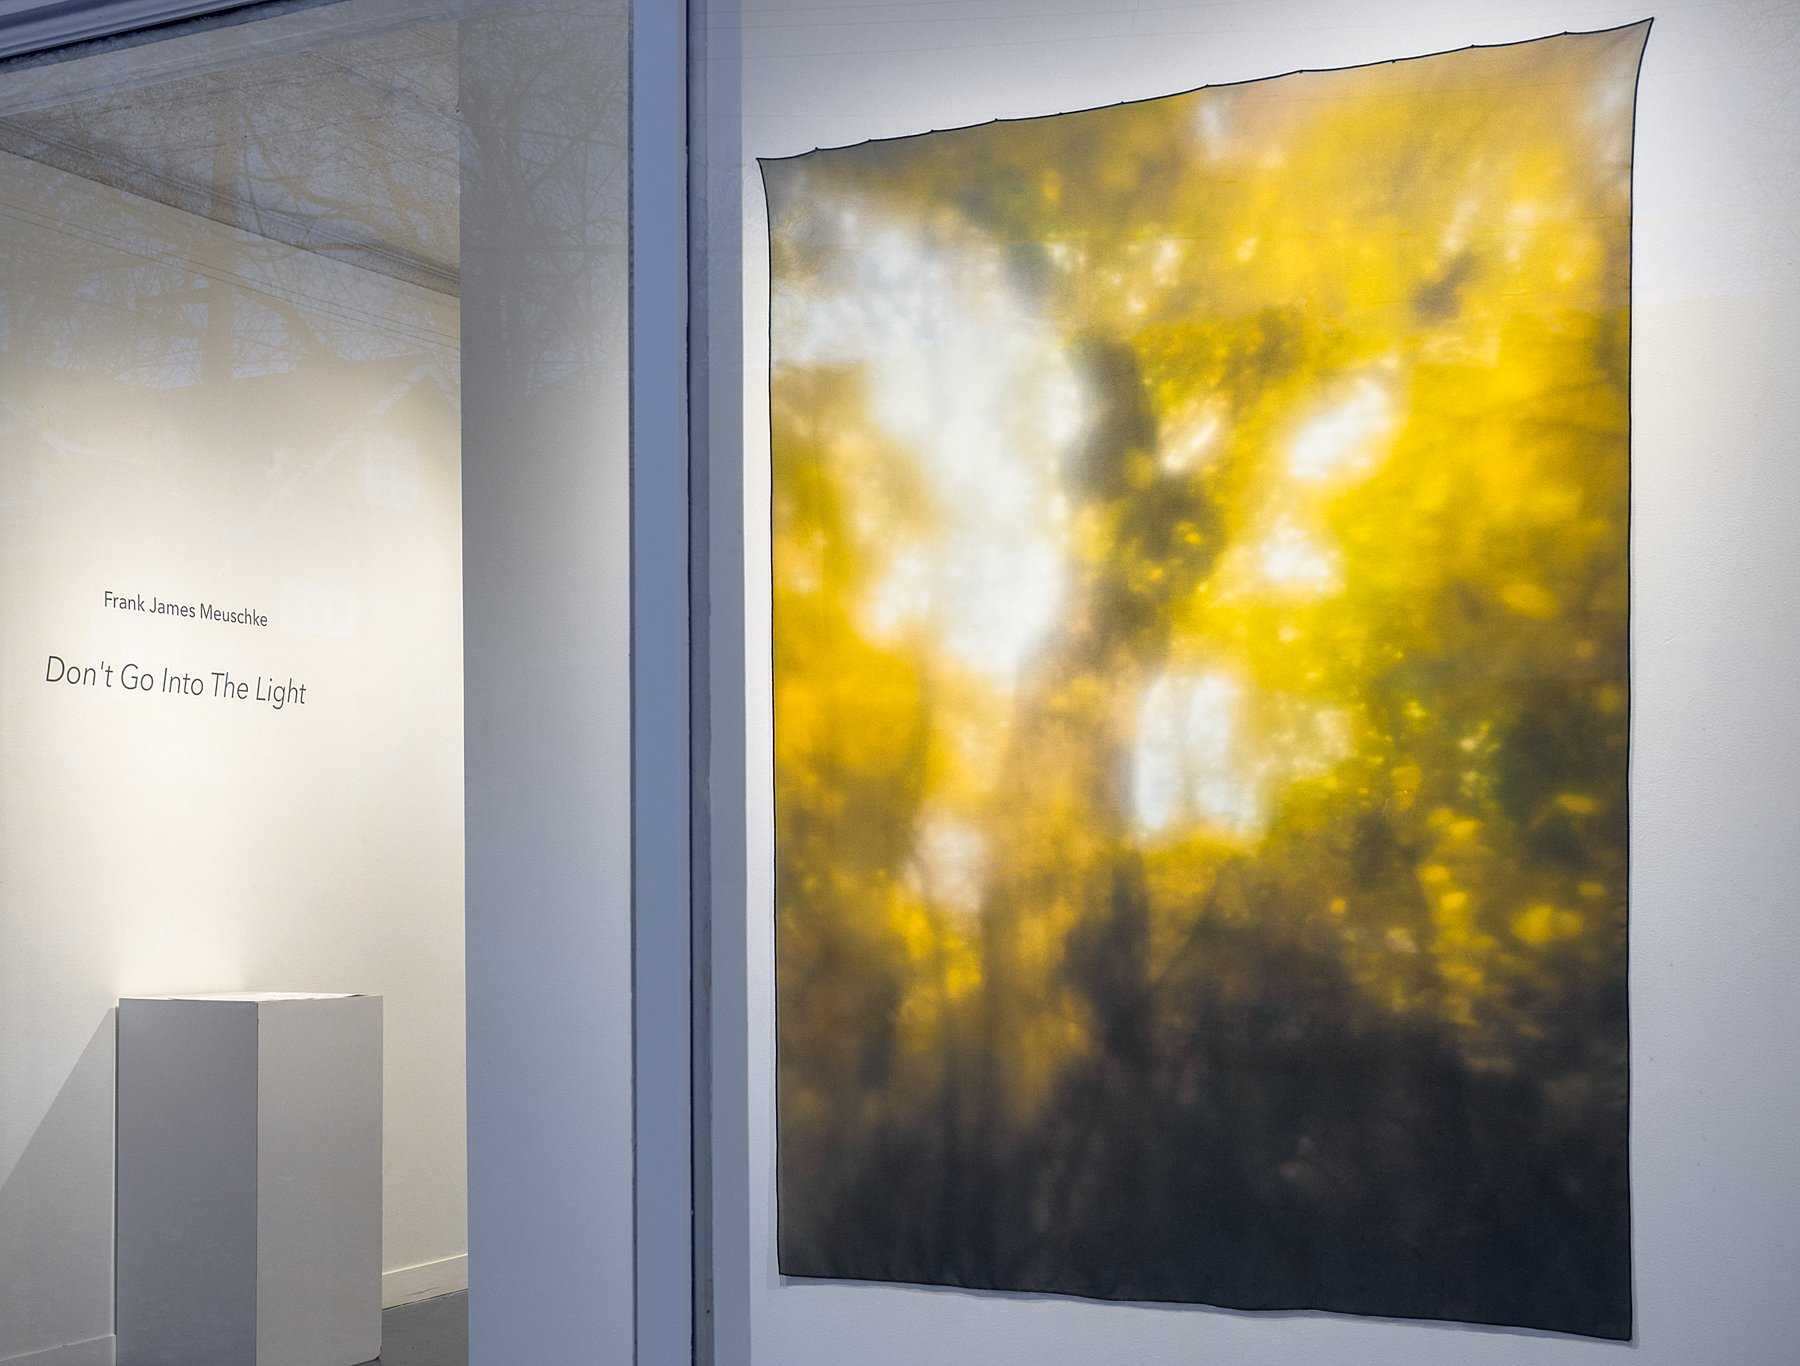 Window View, "Don't Go Into The Light" at Rosalux Gallery, Minneapolis 2022